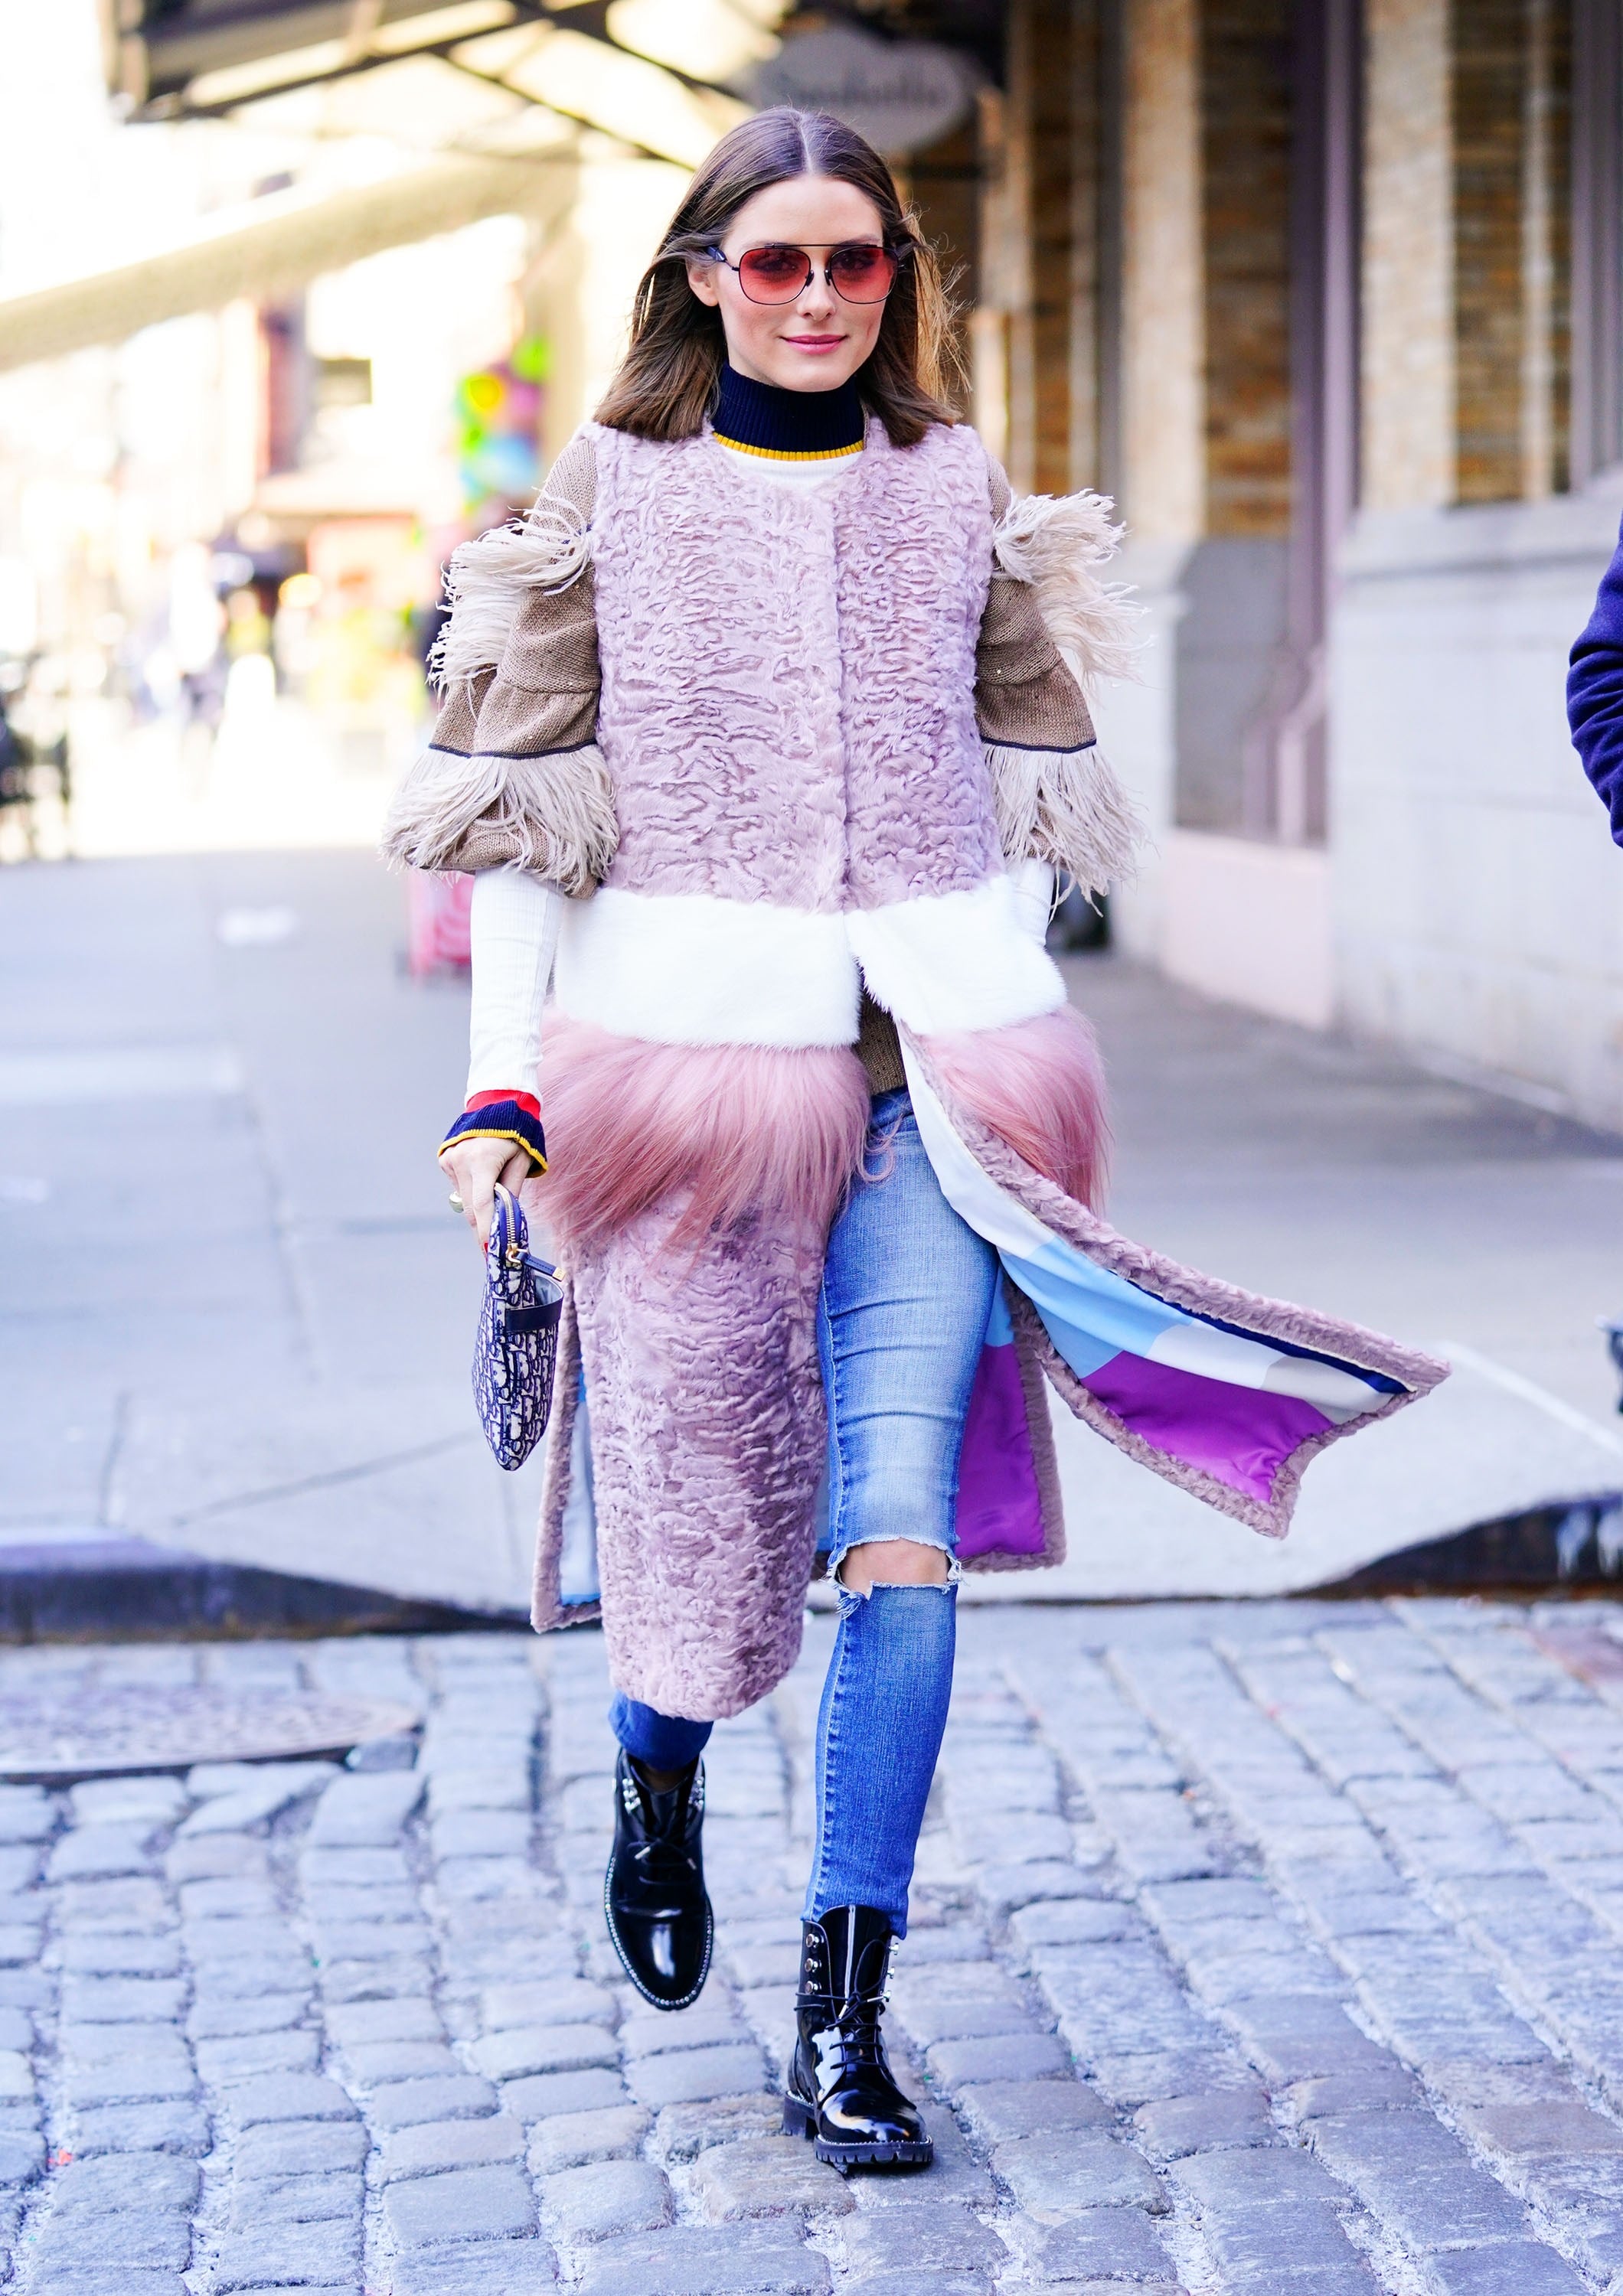 Olivia Palermo in fur coat with purple bag and white sneakers in New York  on April 11 ~ I want her style - What celebrities wore and where to buy it.  Celebrity Style